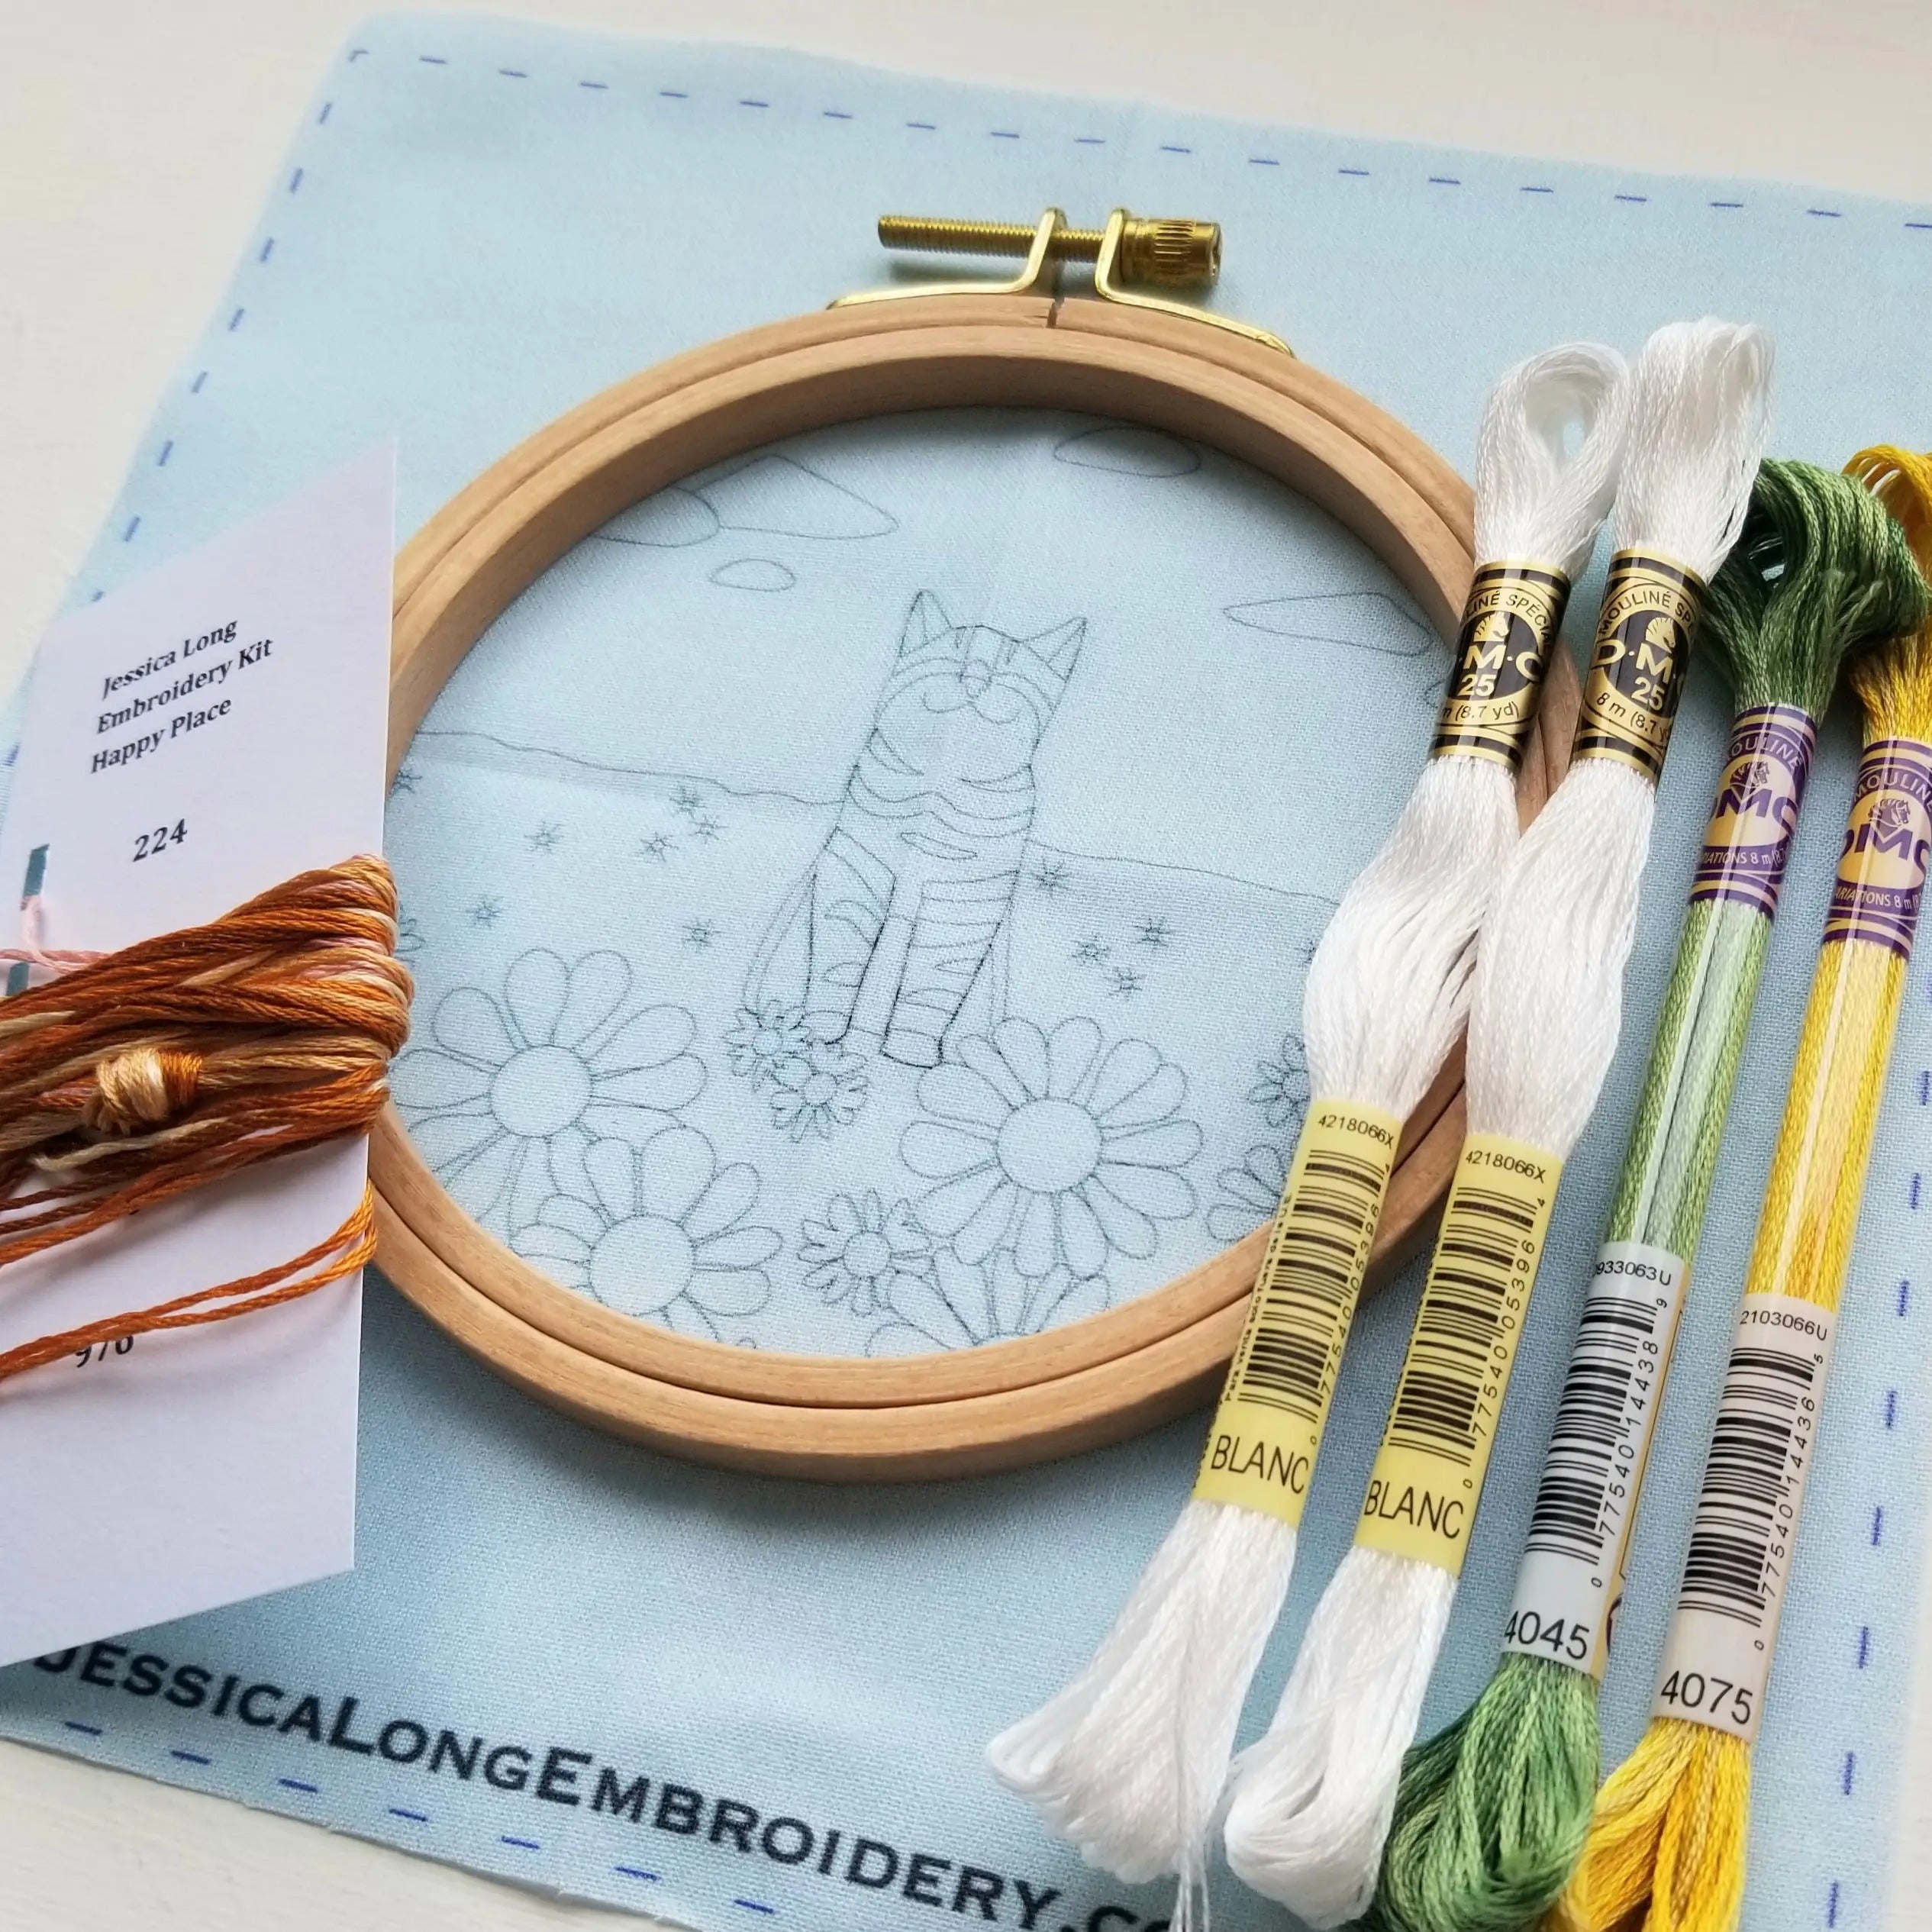 Cat Hand Embroidery Kit for Beginnerembroidery Kit Catmodern Embroidery  Kitembroidery Patterndiy Cat Embroidery Hoop Wall Art Kit 